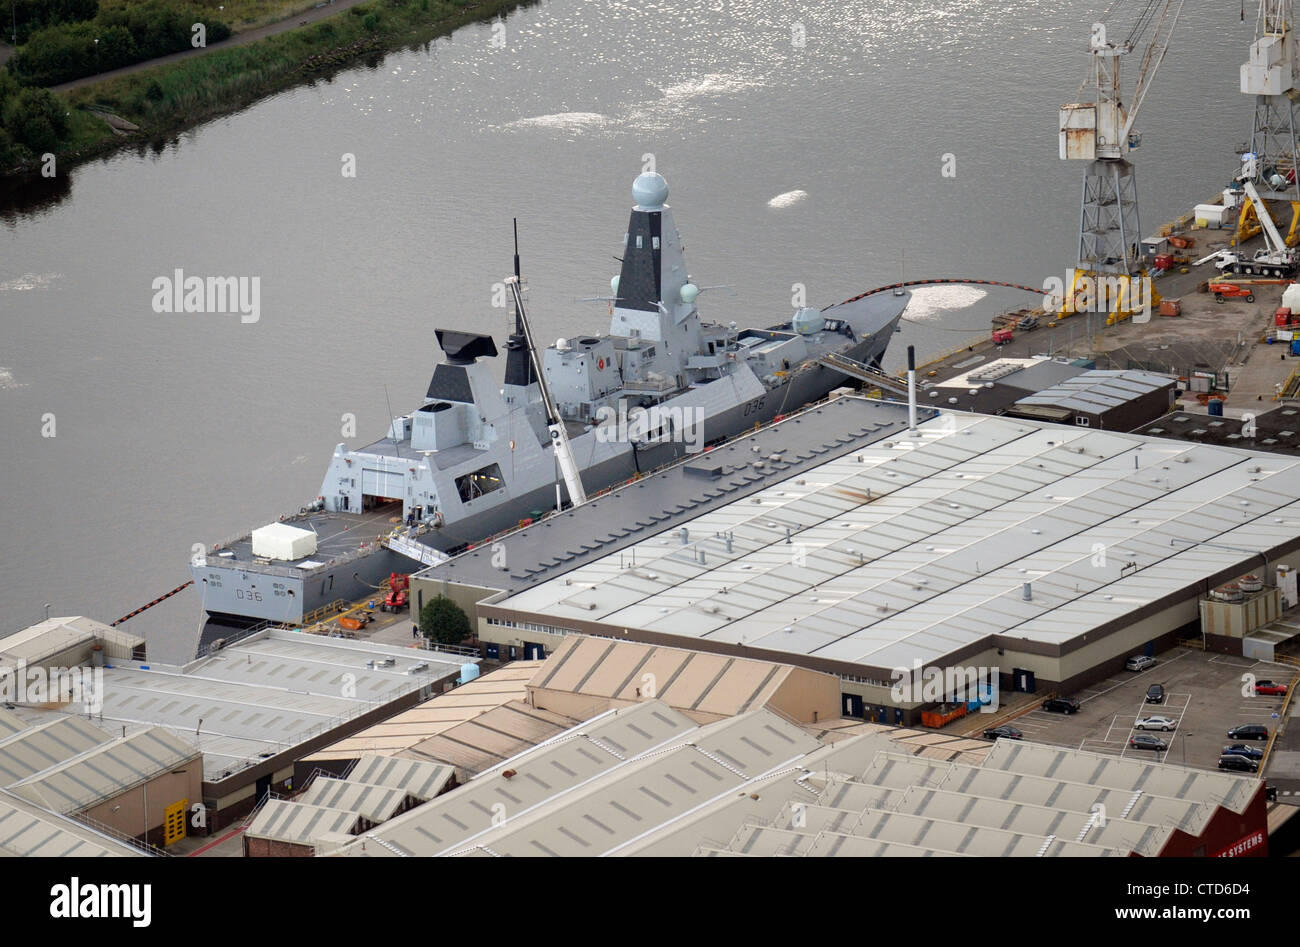 BAE Systems, Glasgow on the River Clyde, with warship in dock. Stock Photo